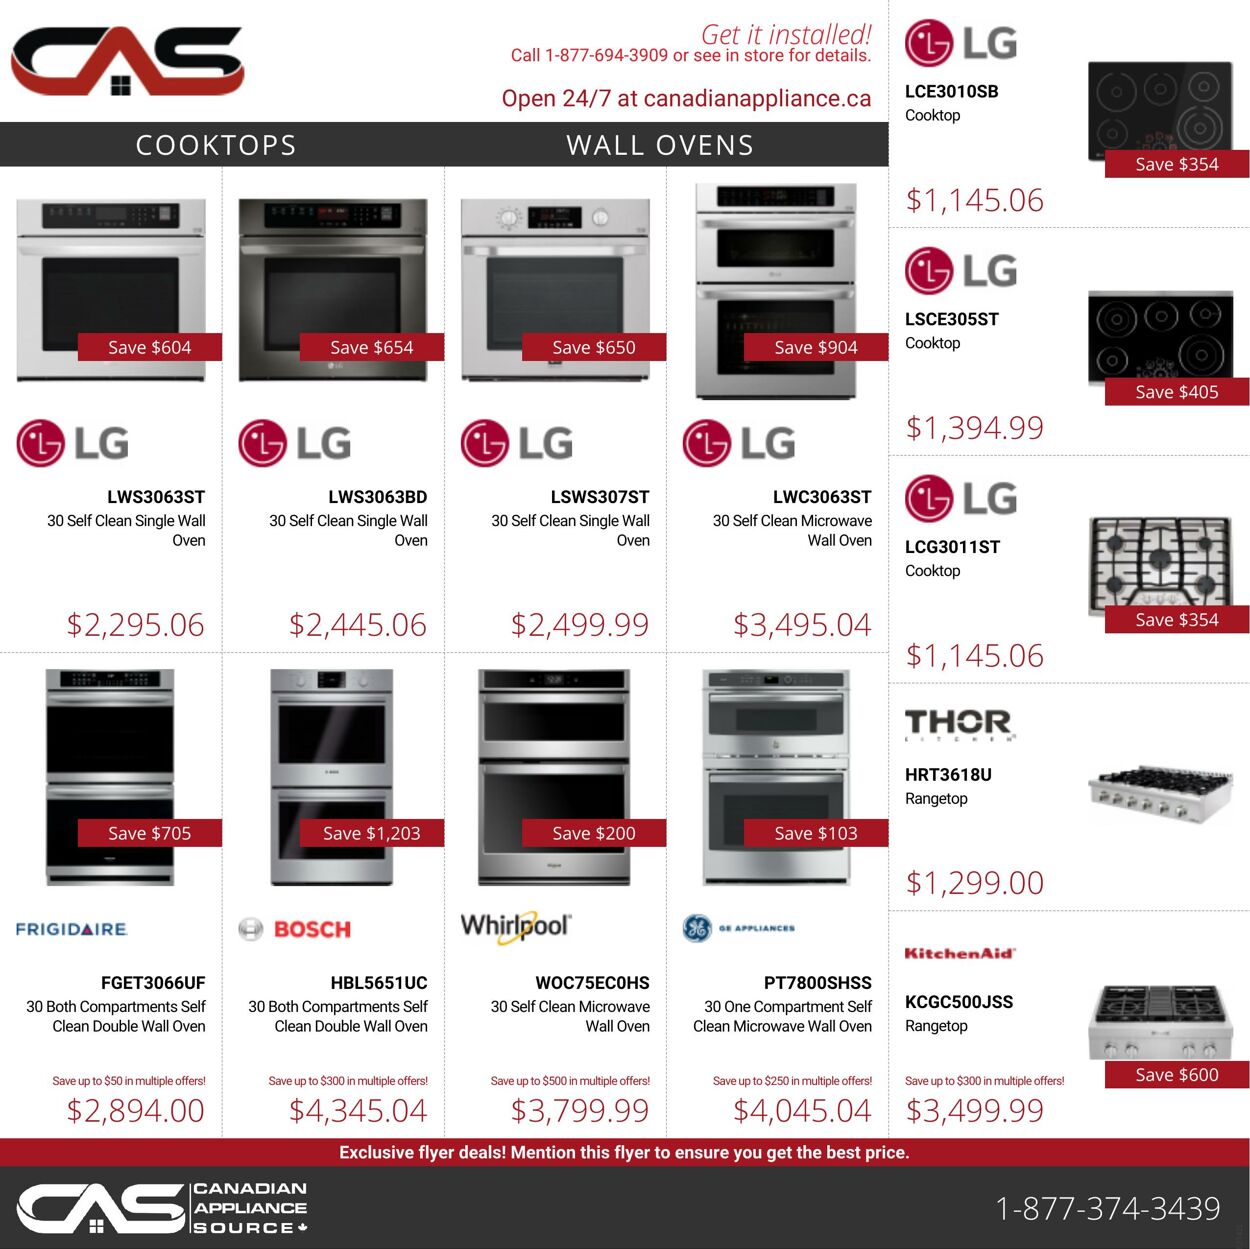 Flyer Canadian Appliance Source 21.10.2021 - 27.10.2021